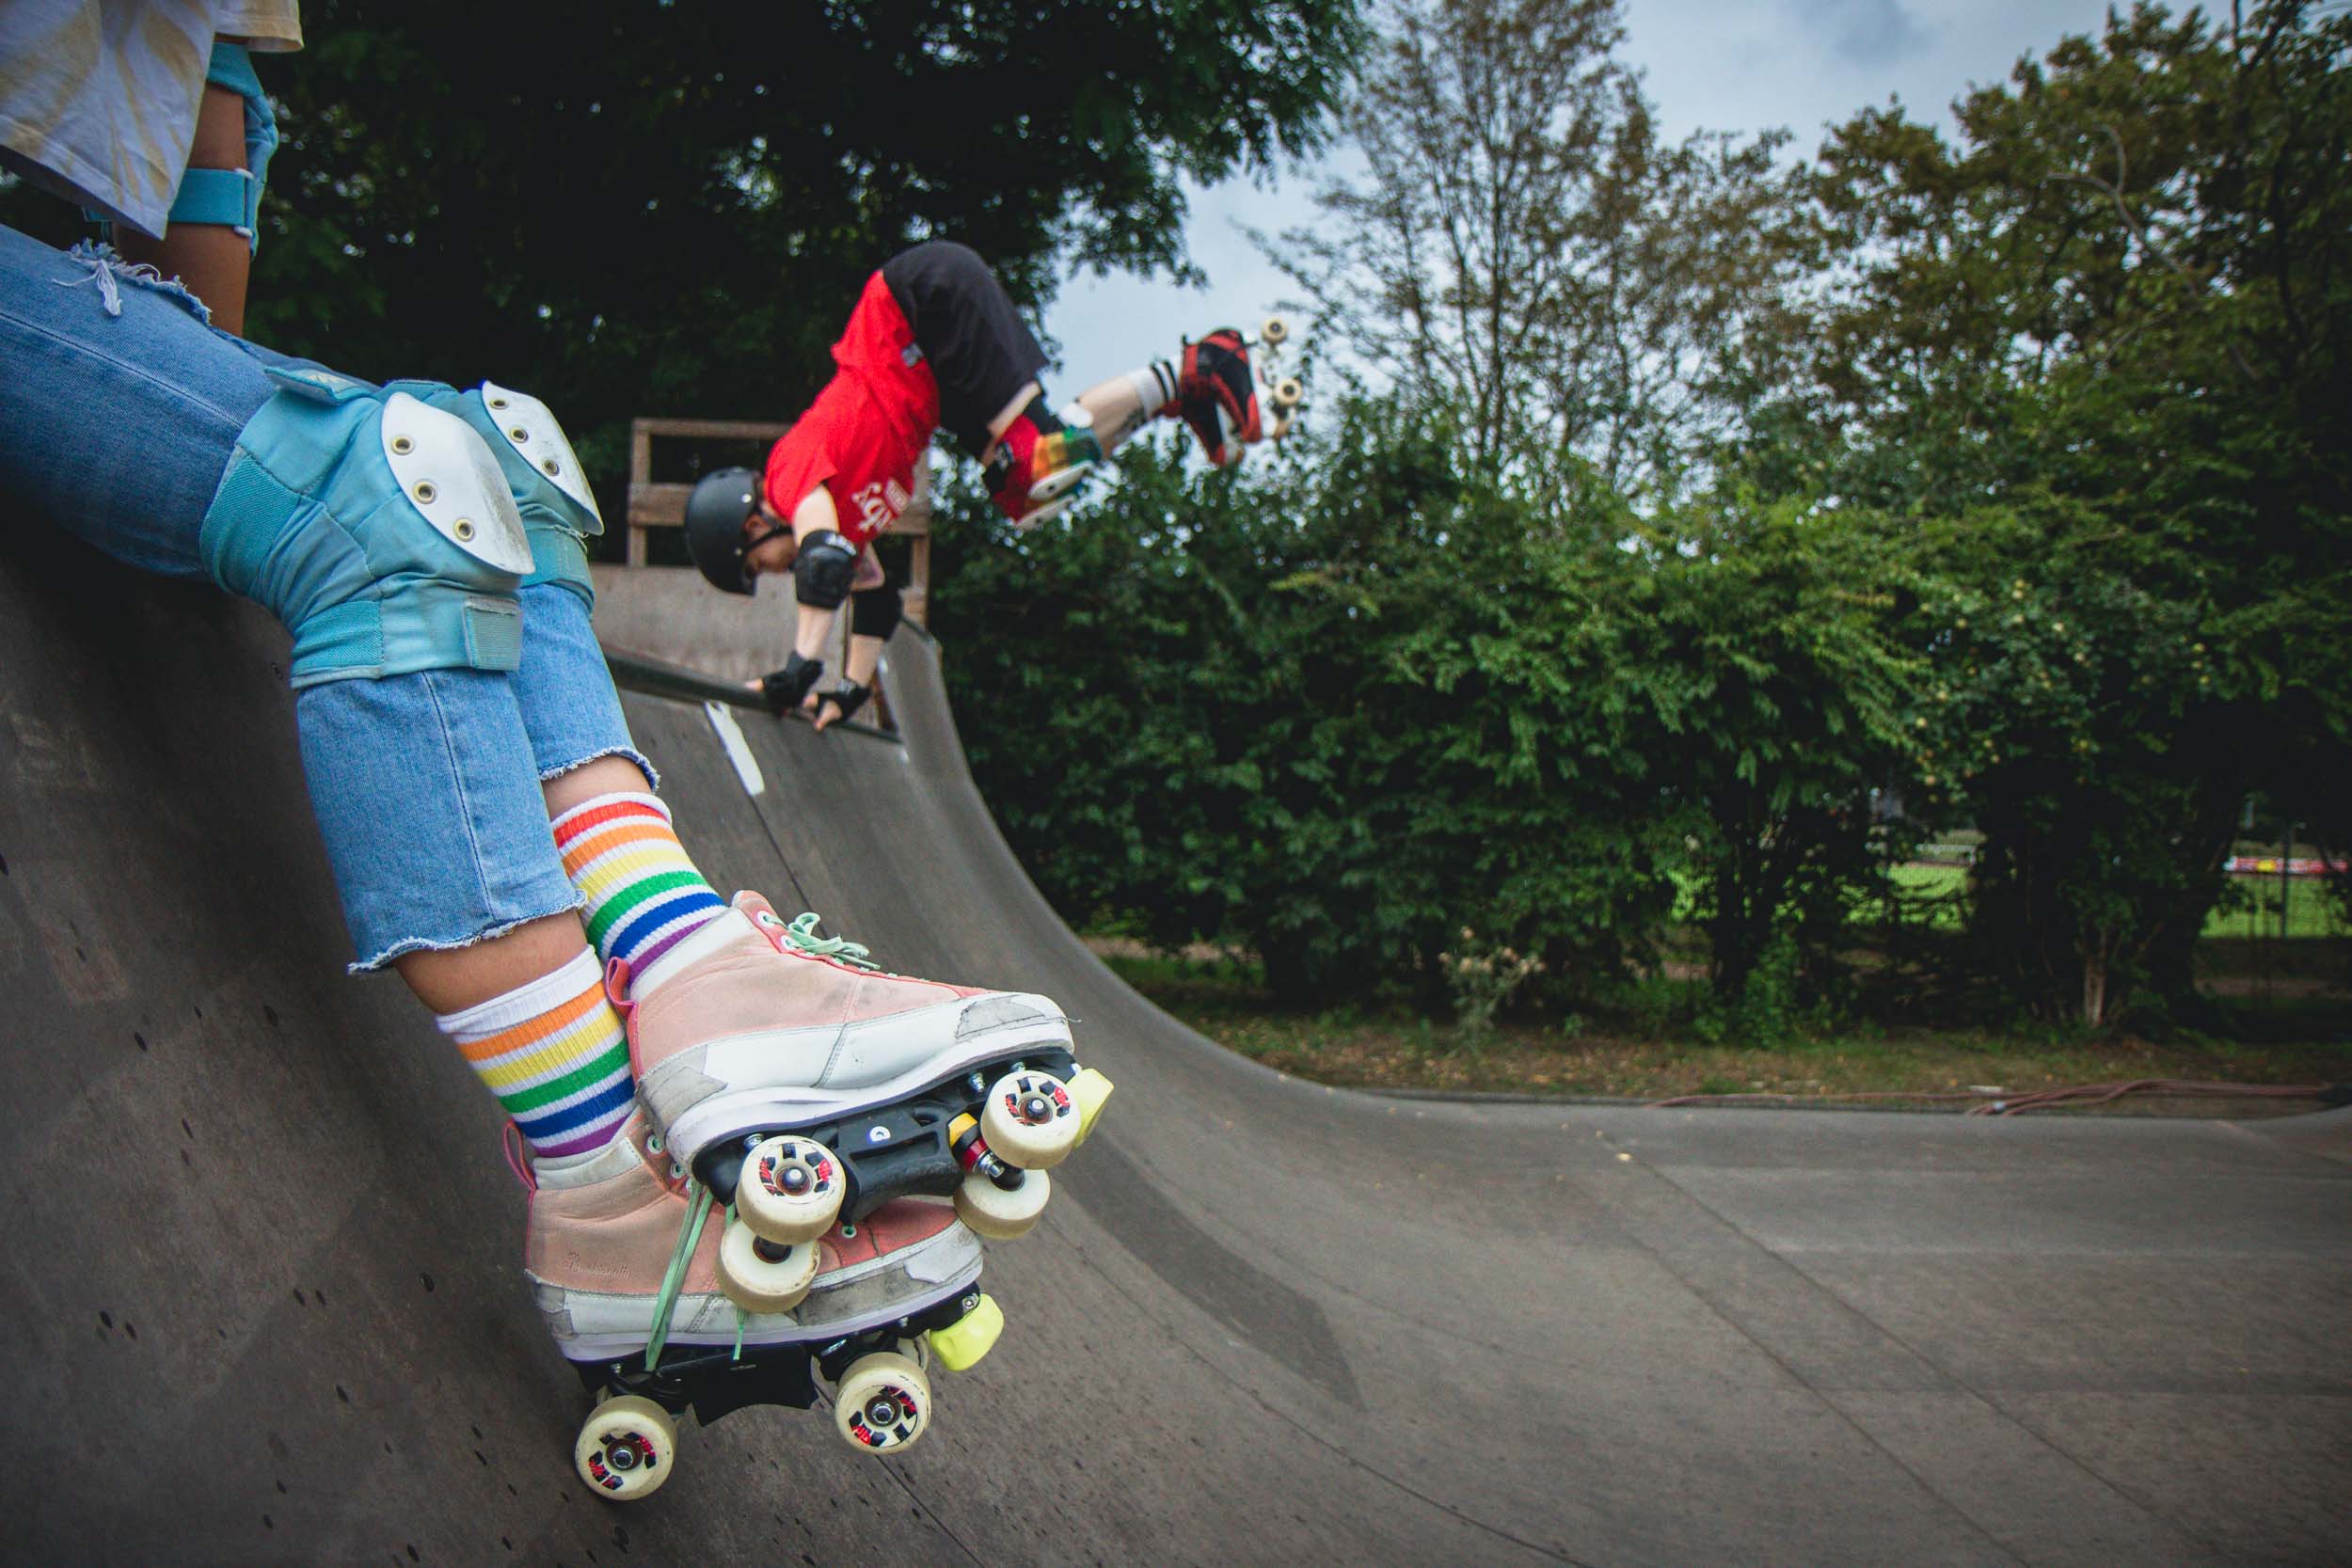 Community in Bowls – The Conquest of NRW’s Skate Parks by Roller-Skating Women